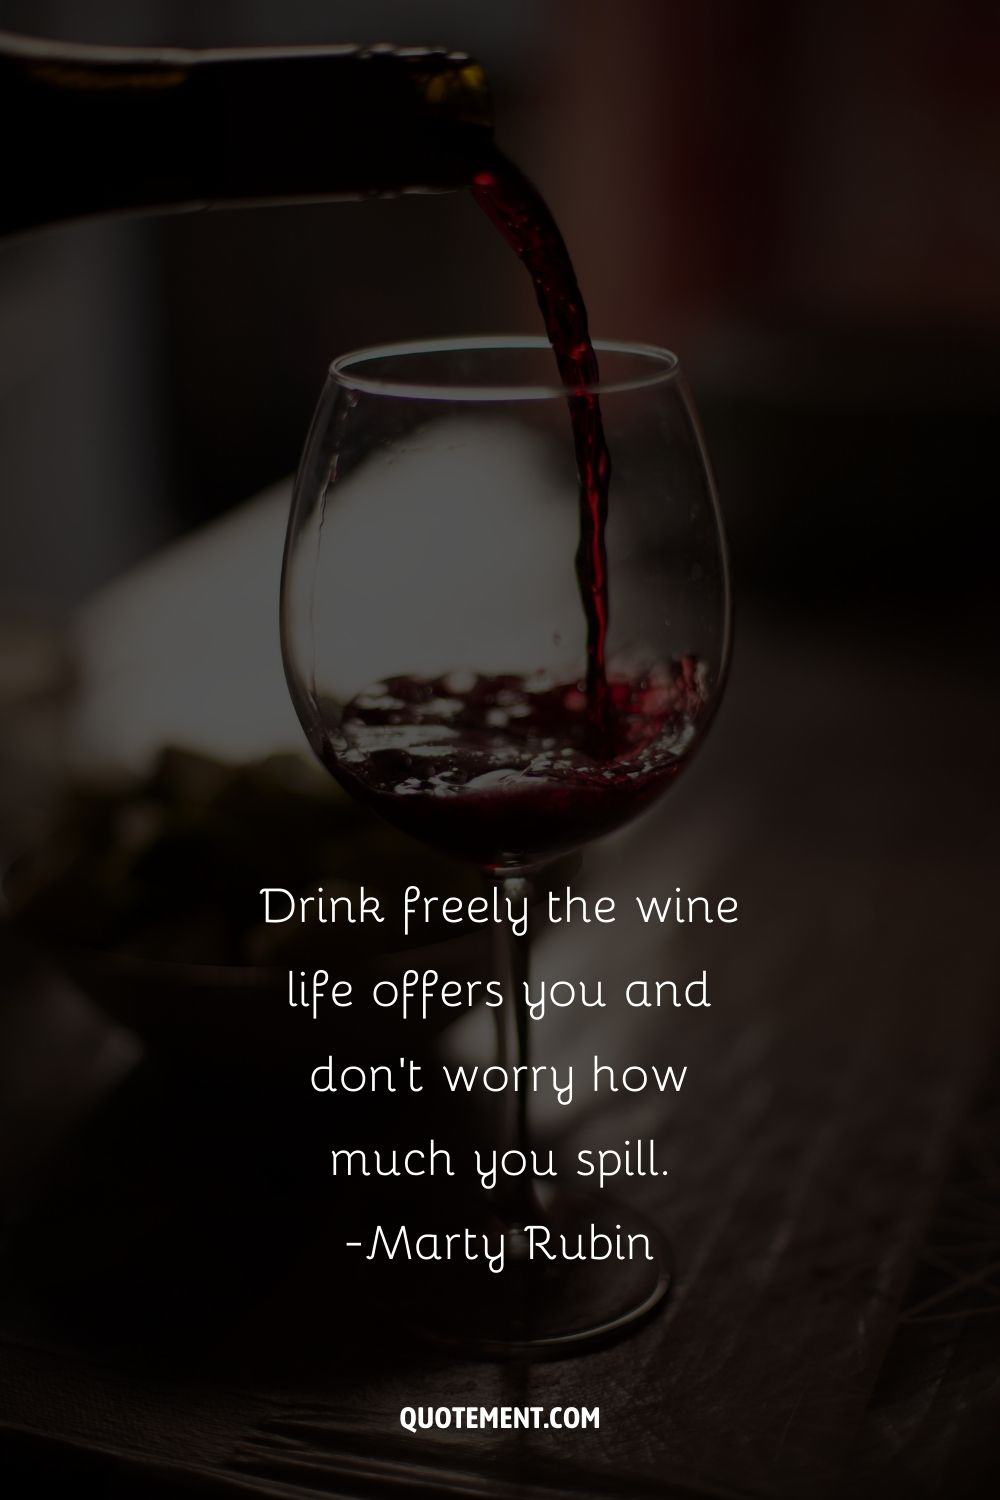 wine pouring image representing a sassy wine tasting quote